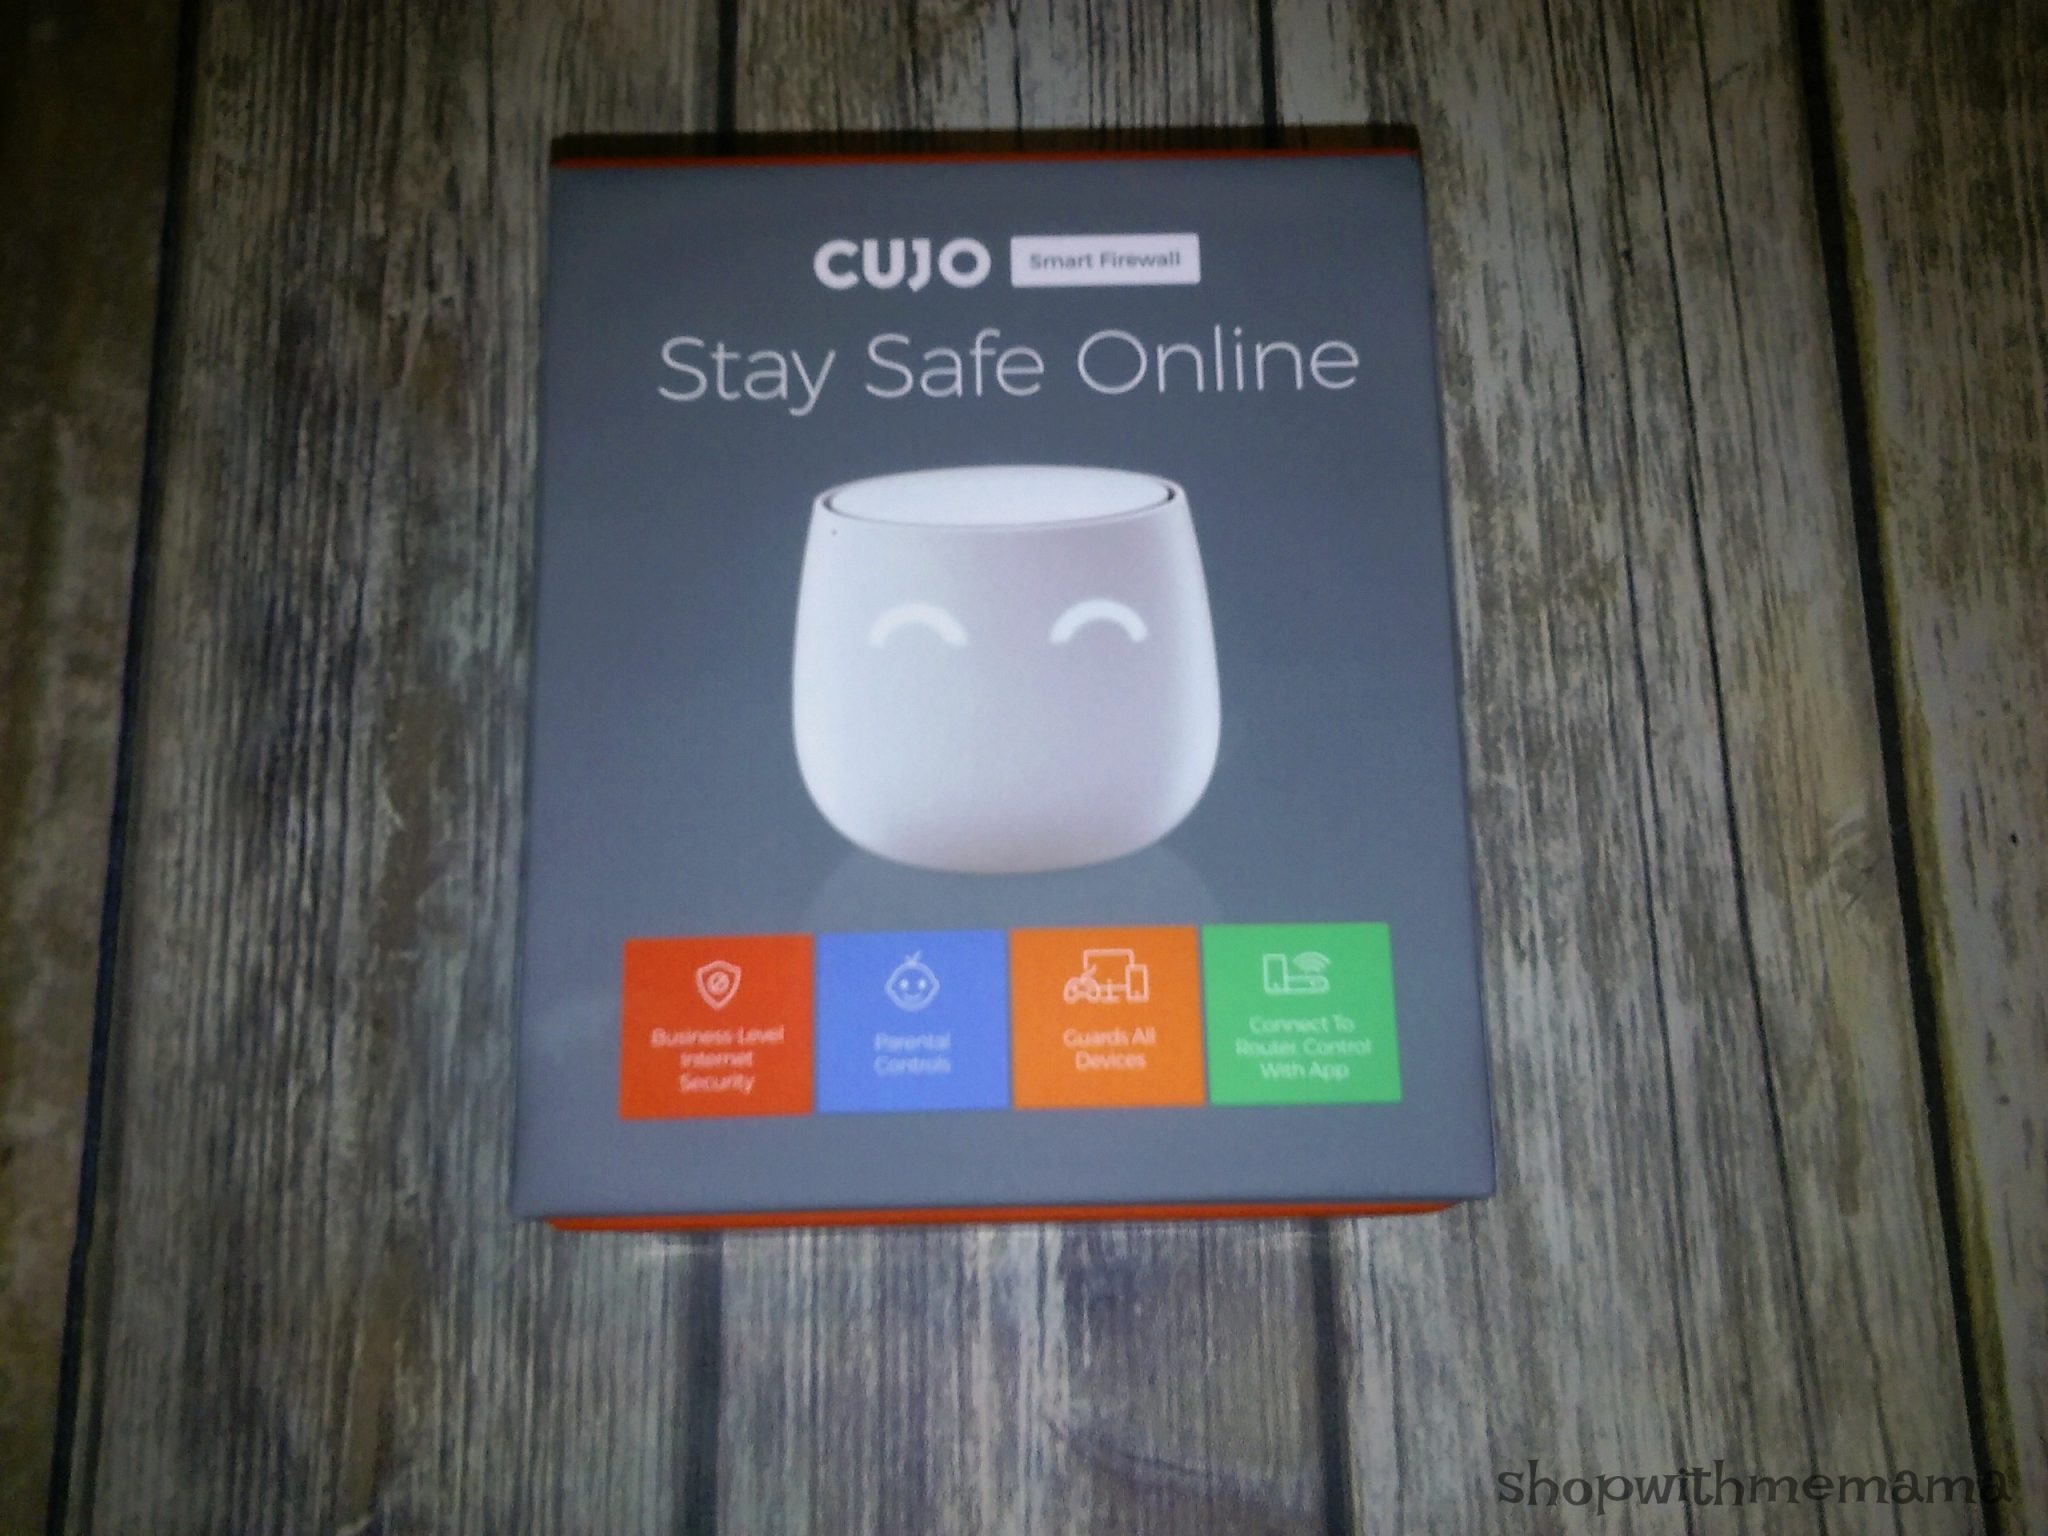 Protect Your Home Network With CUJO Smart Internet Firewall